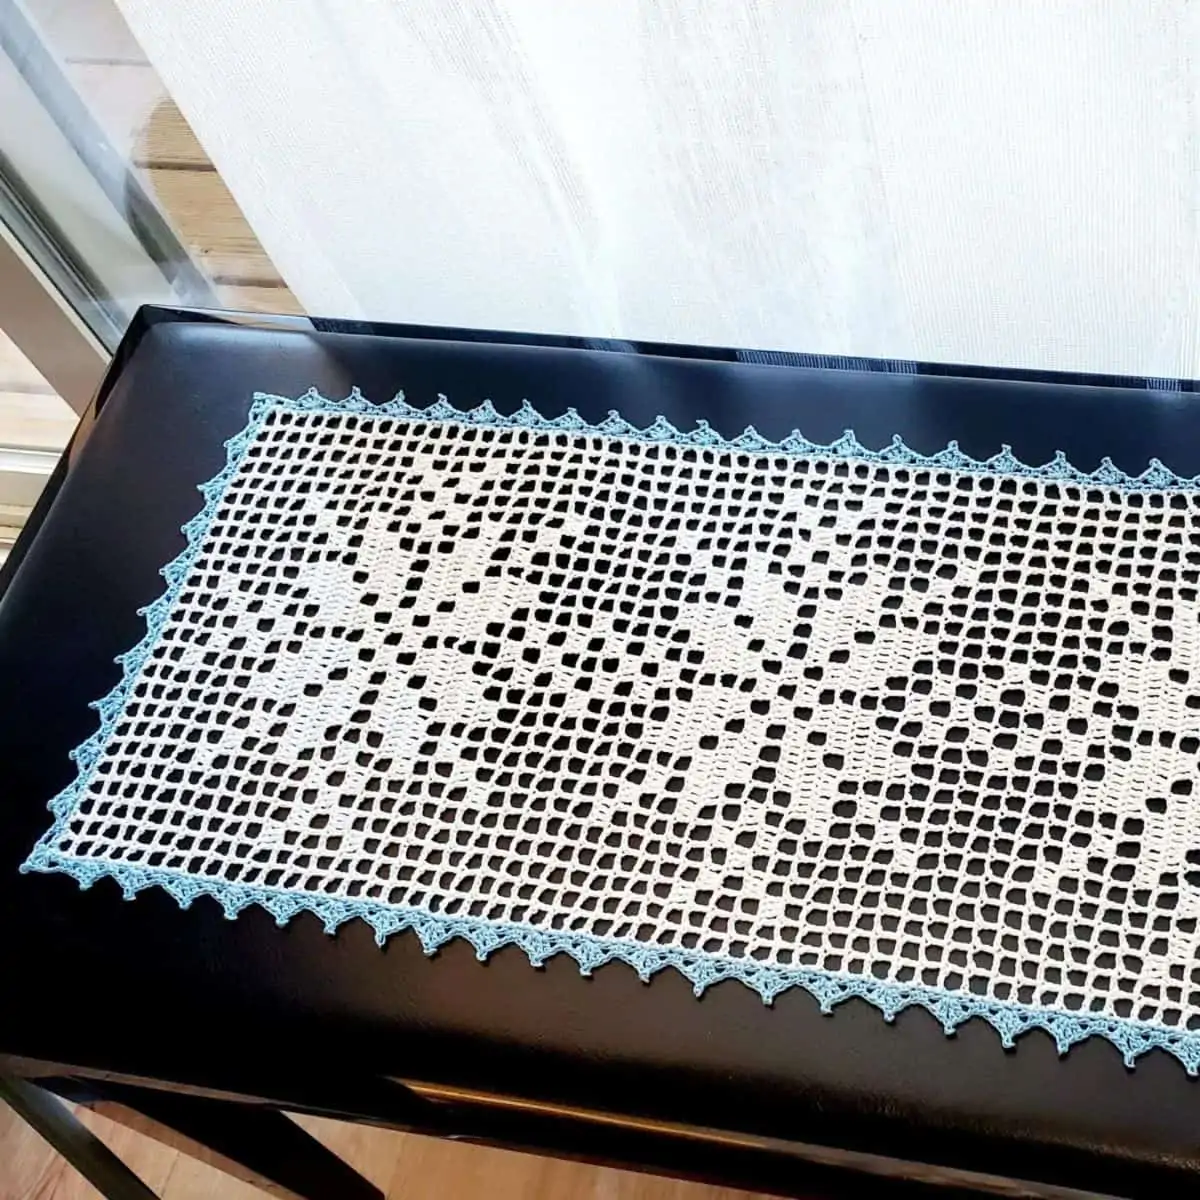 lacy crochet table runner with a snowflake motif sitting on a small black table